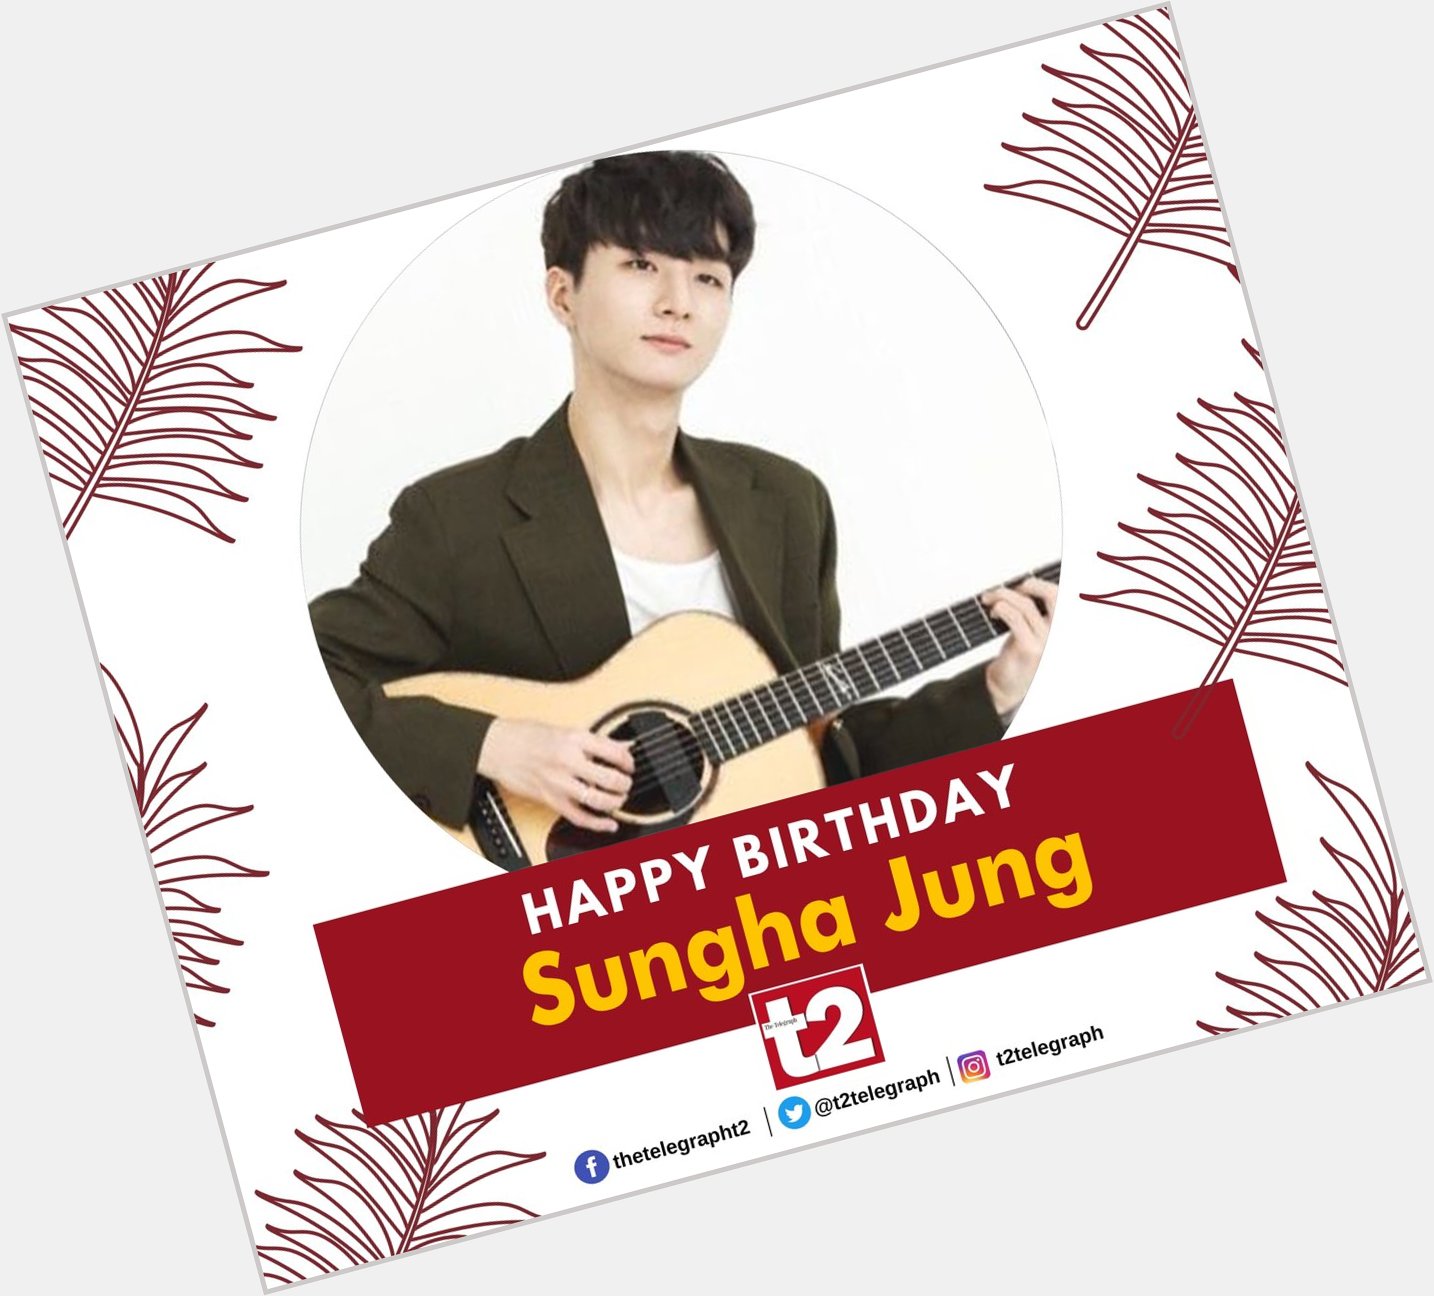 Happy birthday Sungha Jung and thank you for all the contemplative guitar pieces 